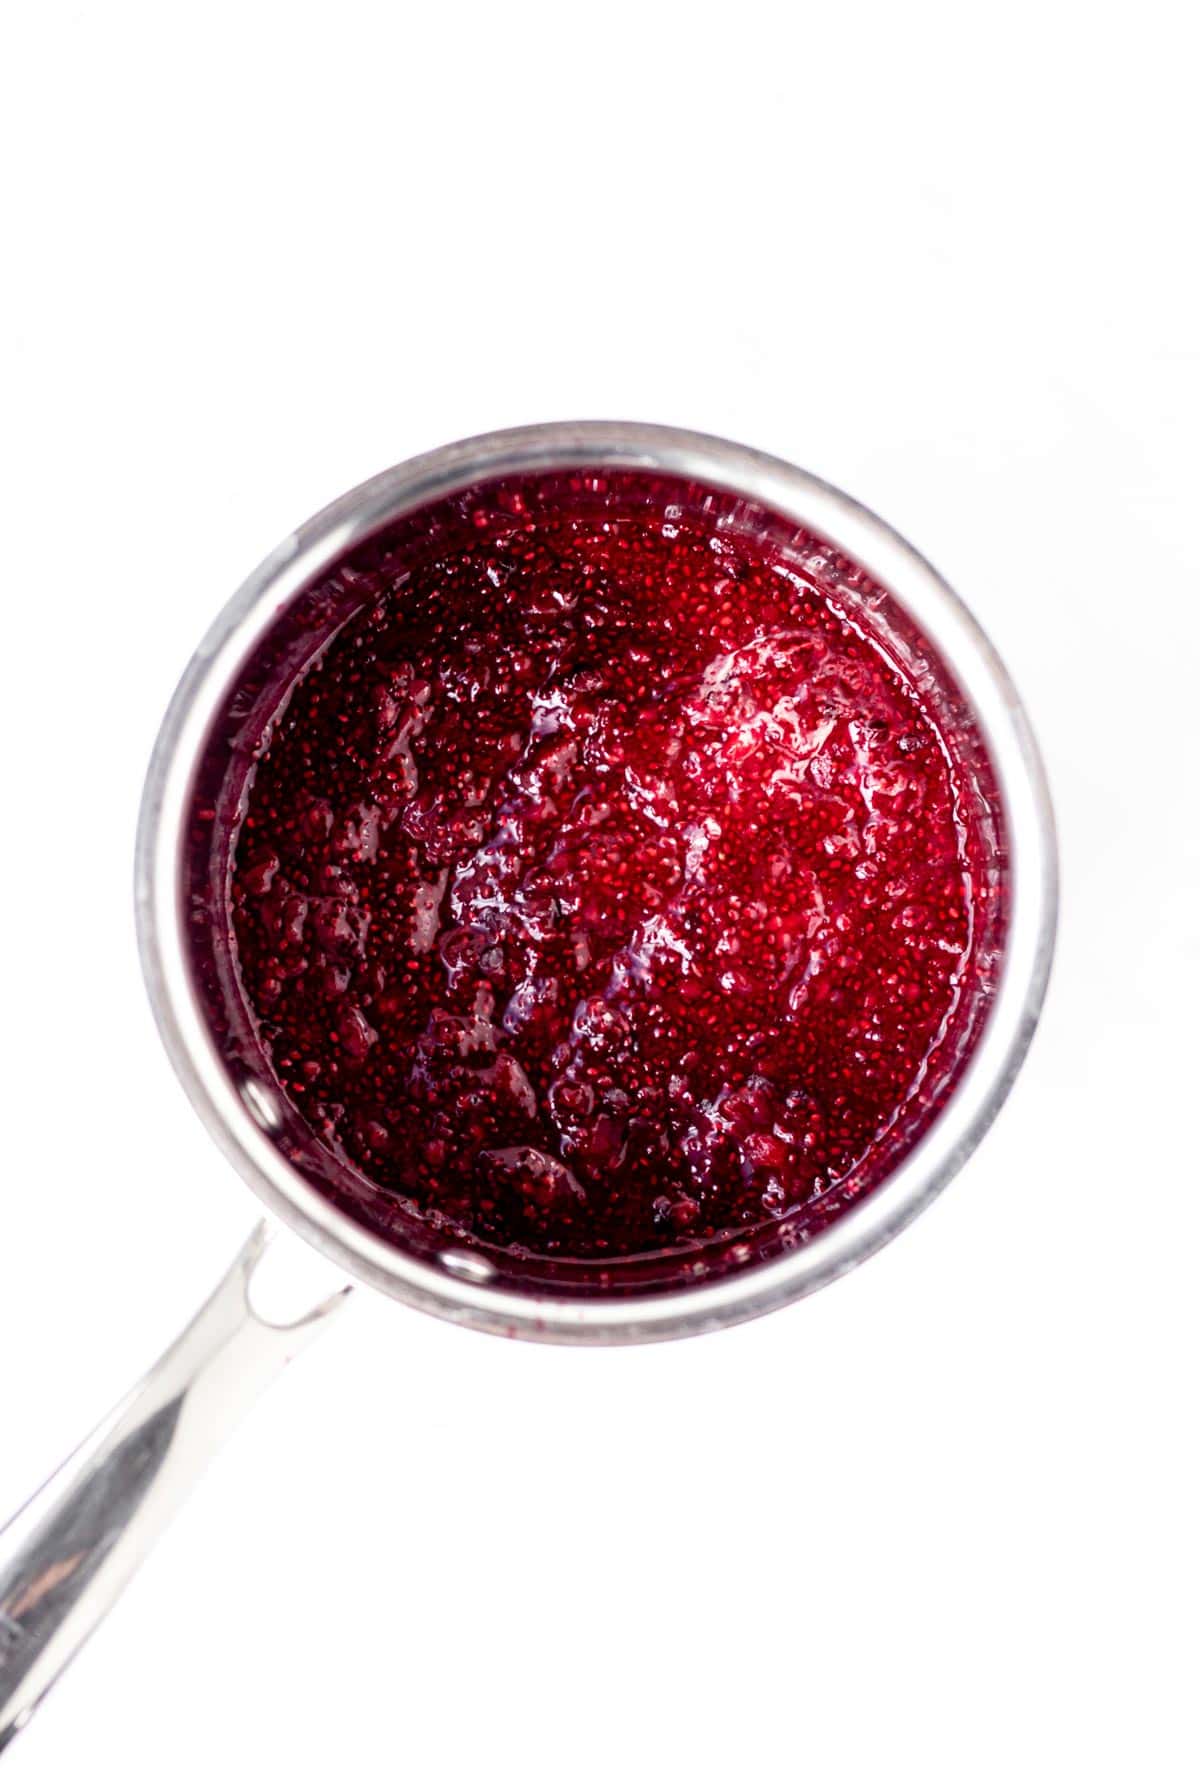 Mixed berry chia jam in a small pot.